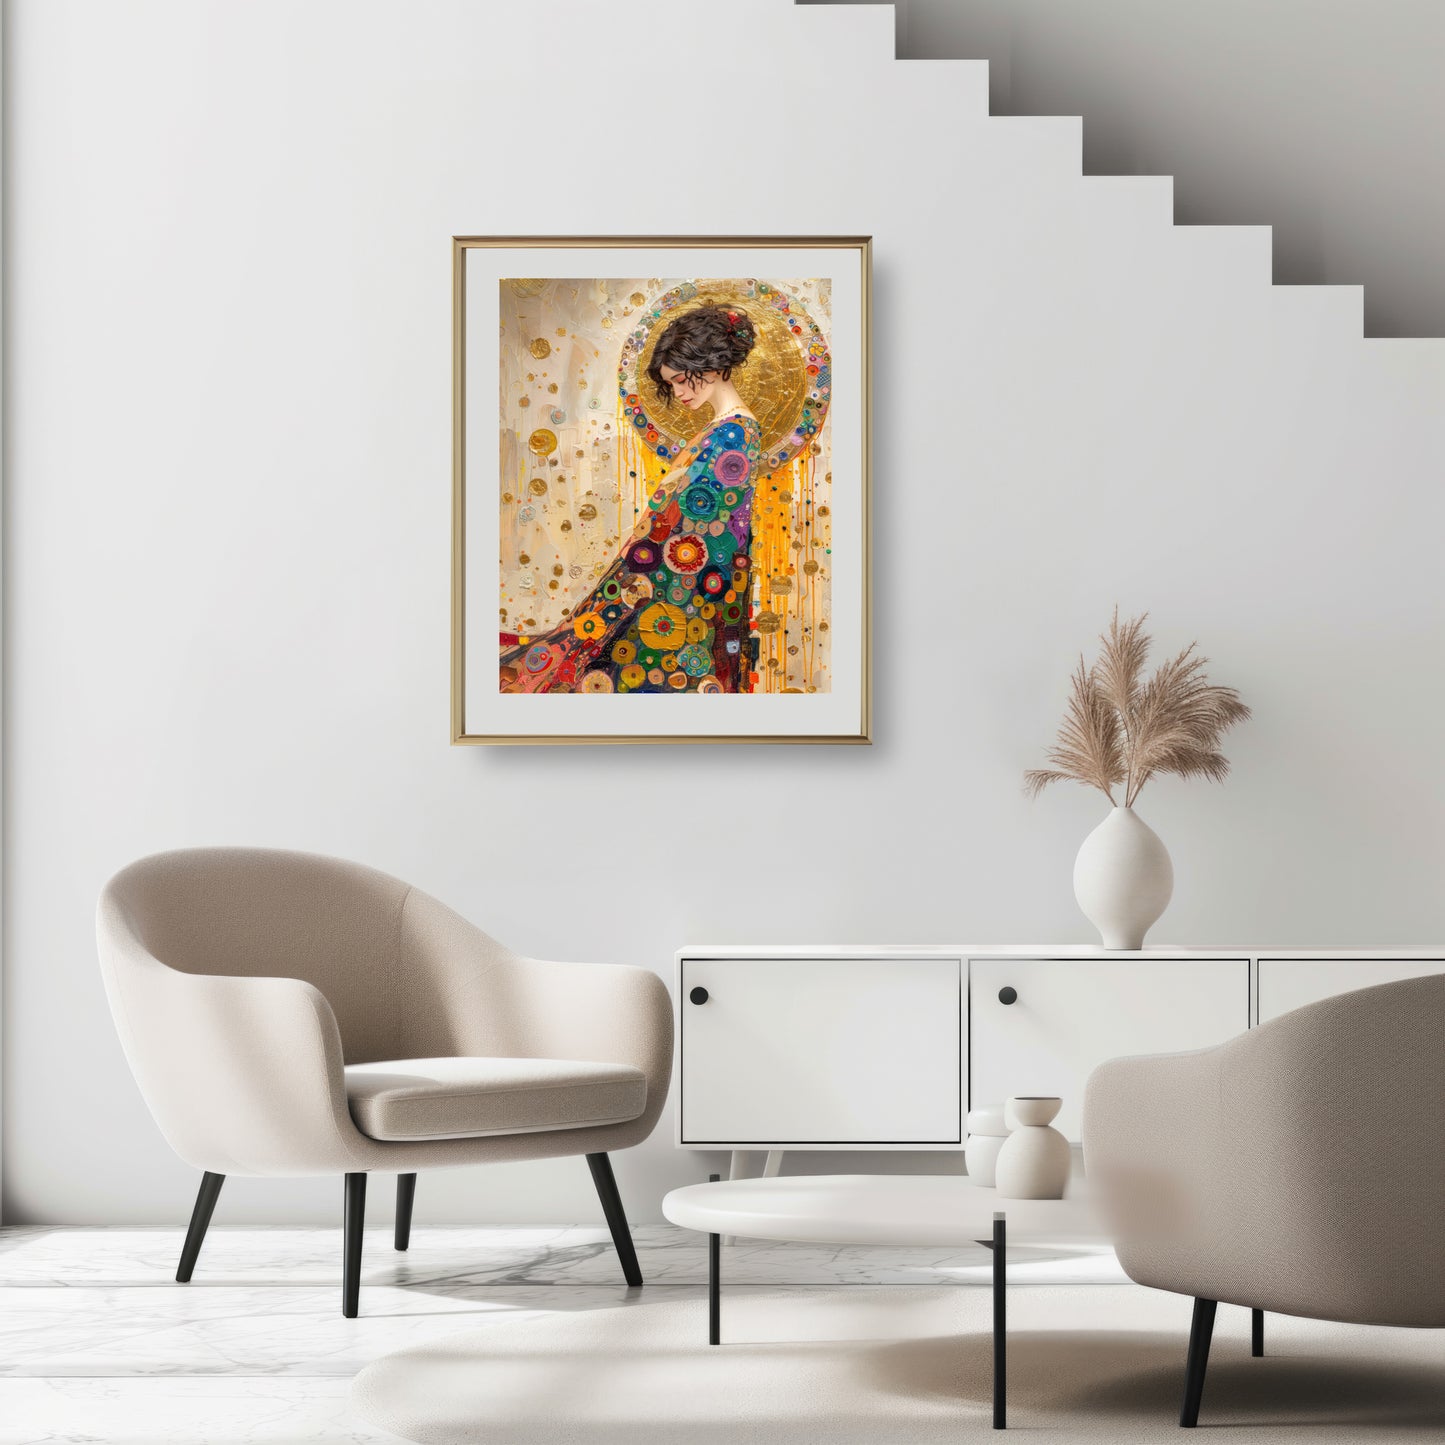 Art print of a woman in a vibrant circular-patterned cloak set against a golden background from the Heart Of Gold collection.